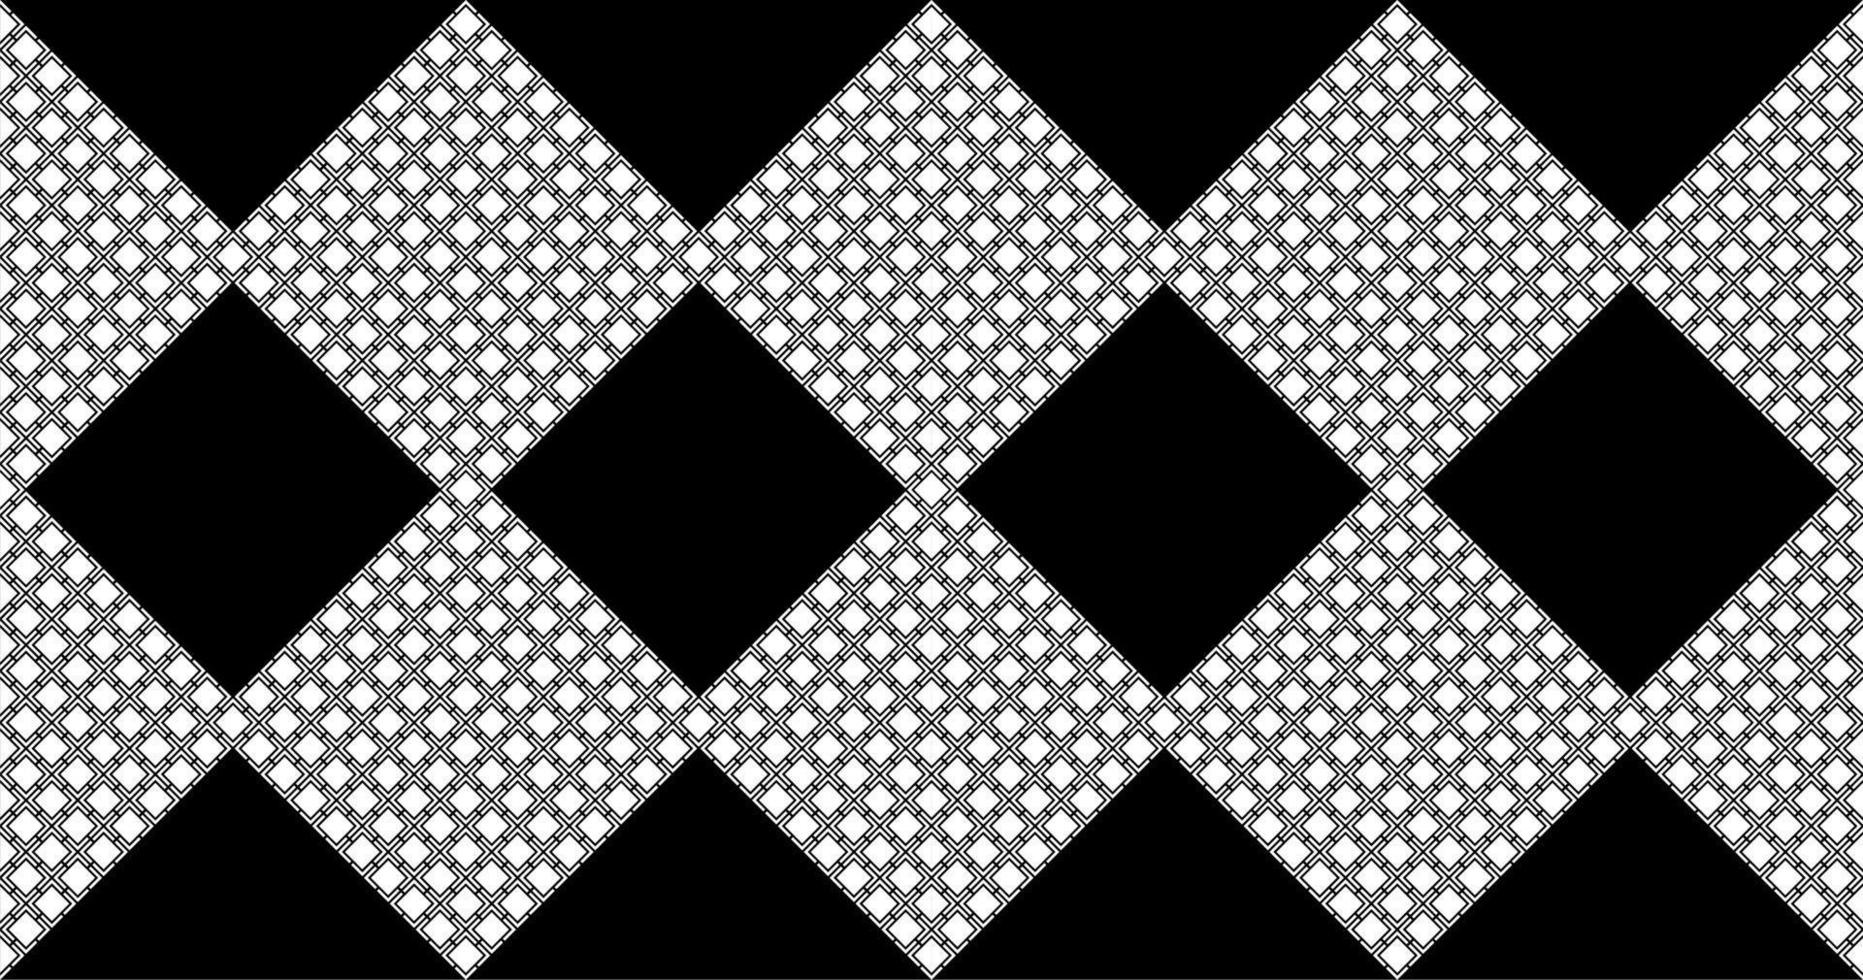 Seamless Rectangles Motifs Pattern. Decoration for Interior, Exterior, Carpet, Textile, Garment, Cloth, Silk, Tile, Plastic, Paper, Wrapping, Wallpaper, Pillow, Sofa, Background, Ect. Vector